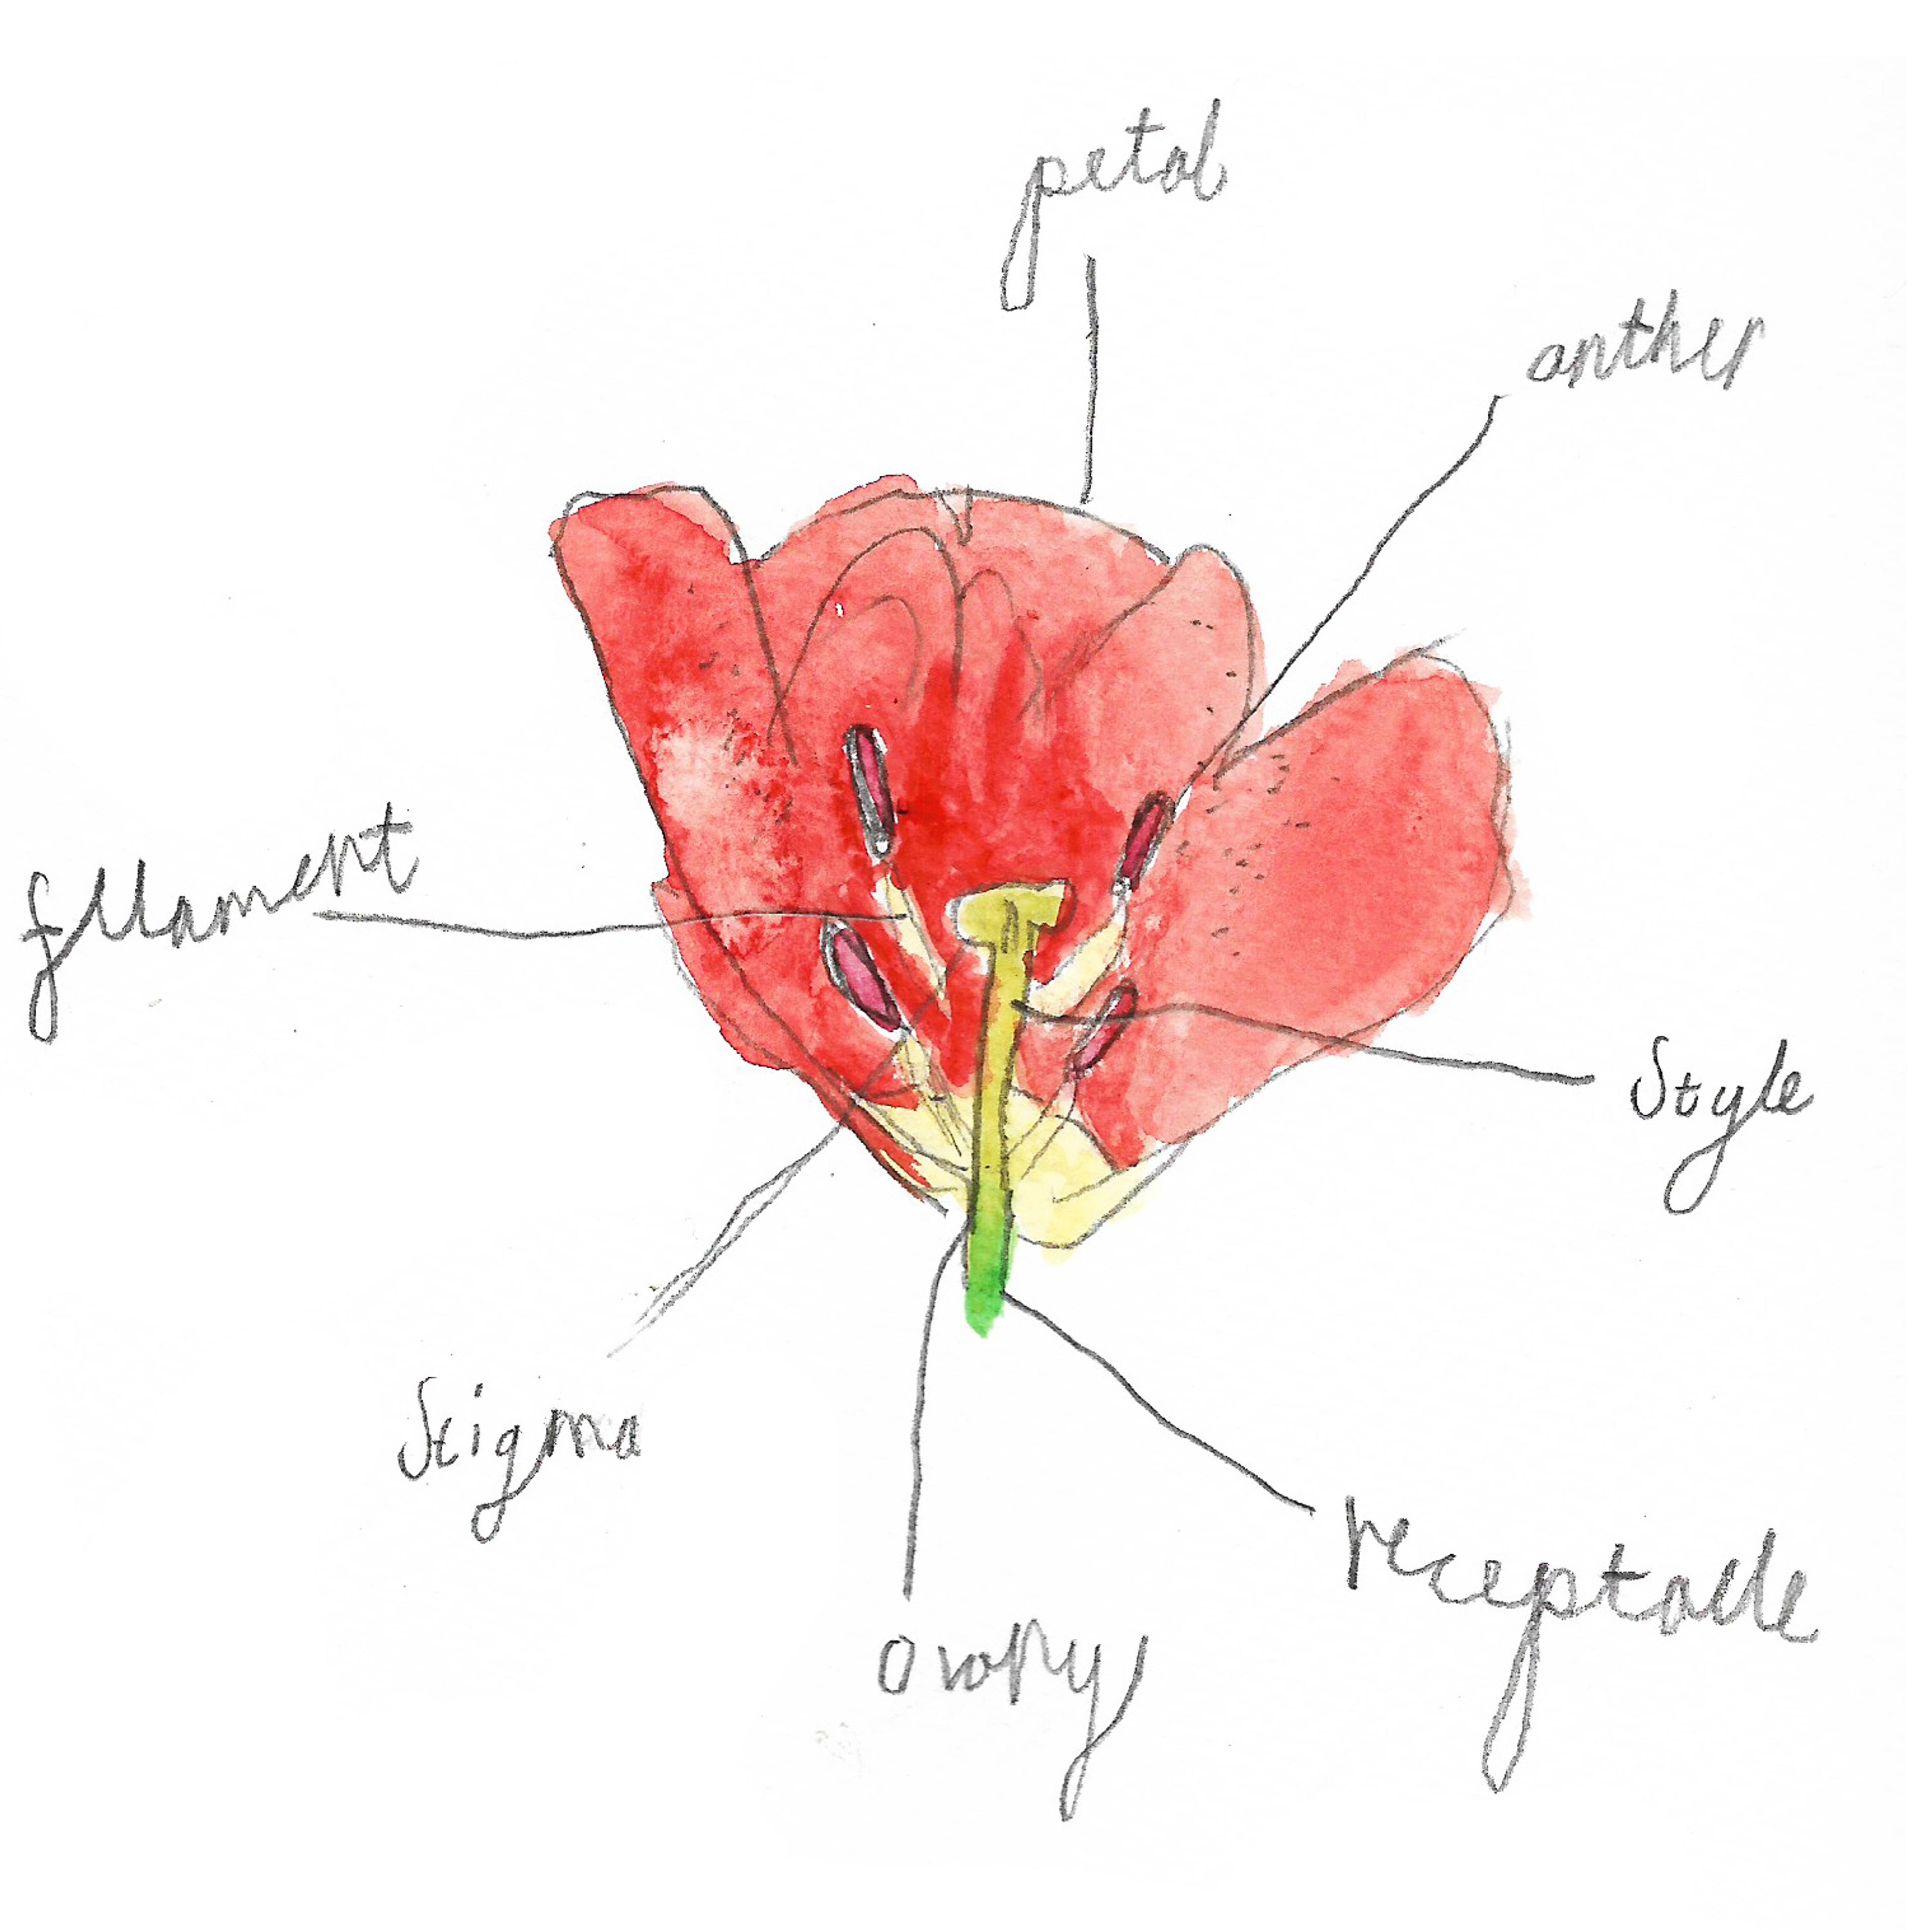 A labelled cross-section of a red flower painted using watercolour